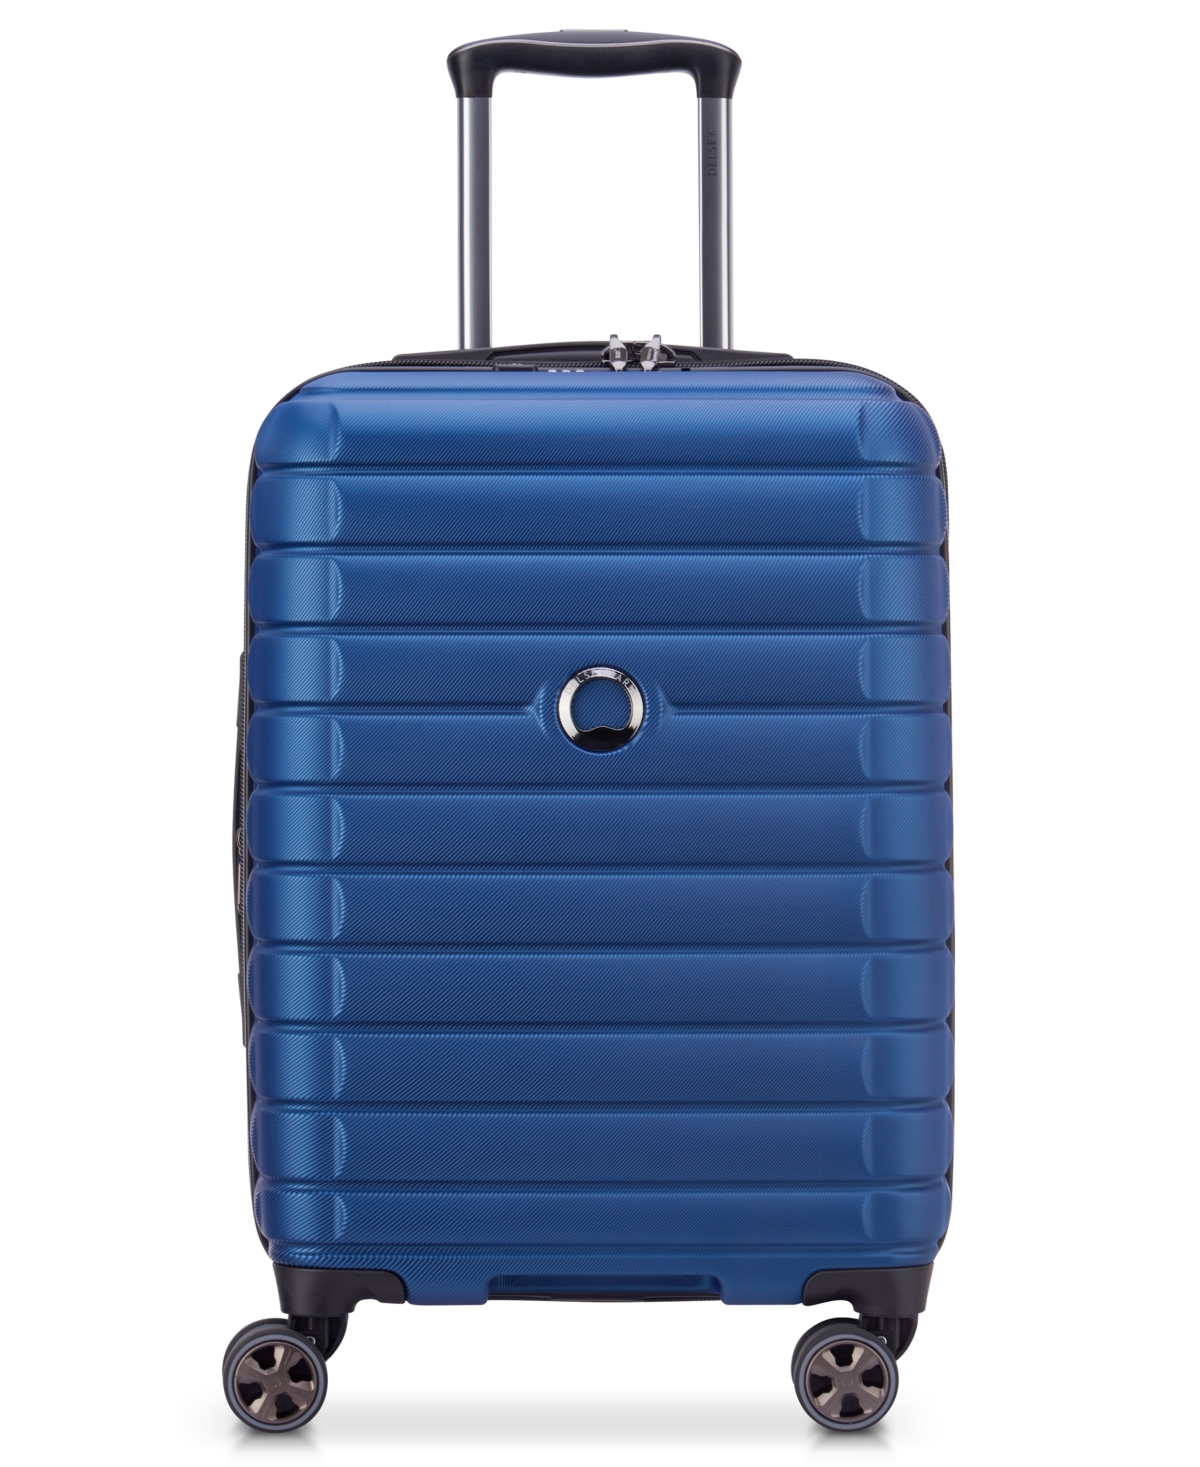 Delsey Shadow 5.0 Expandable 20" Spinner Carry On Luggage In Cobalt Blue